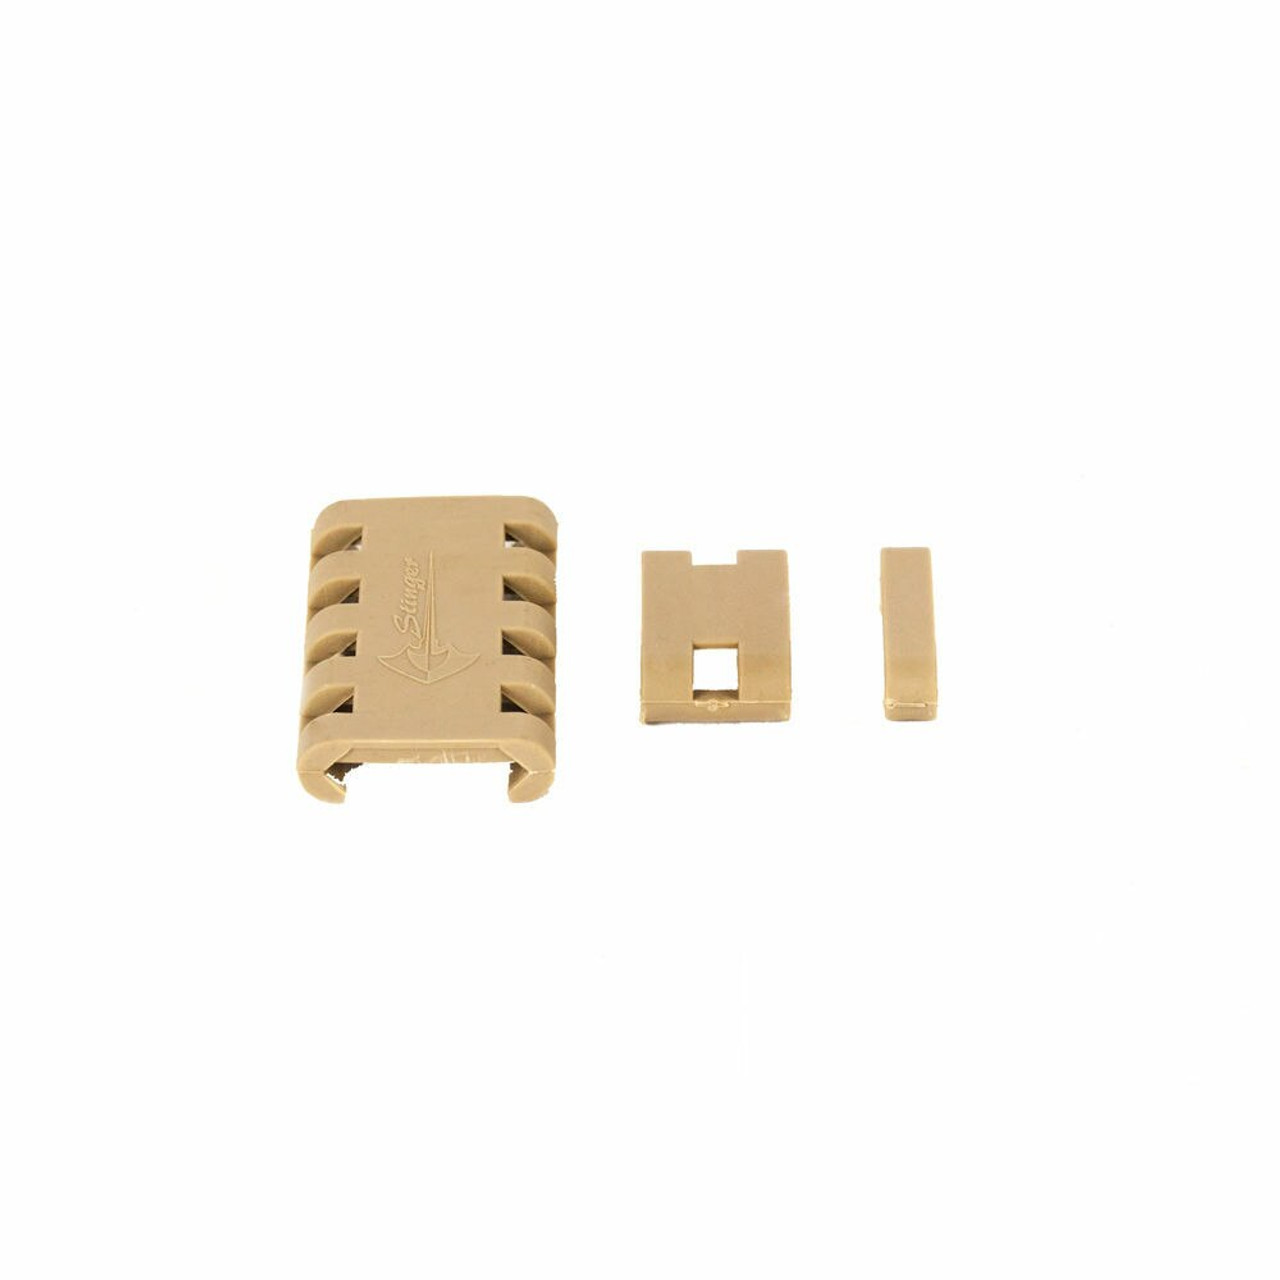 TAN/ FDE! PACK OF 20 PIECES!! 1 2 5 SLOTS PICATINNY WEAVER RAIL COVER KEYMOD SQUARE